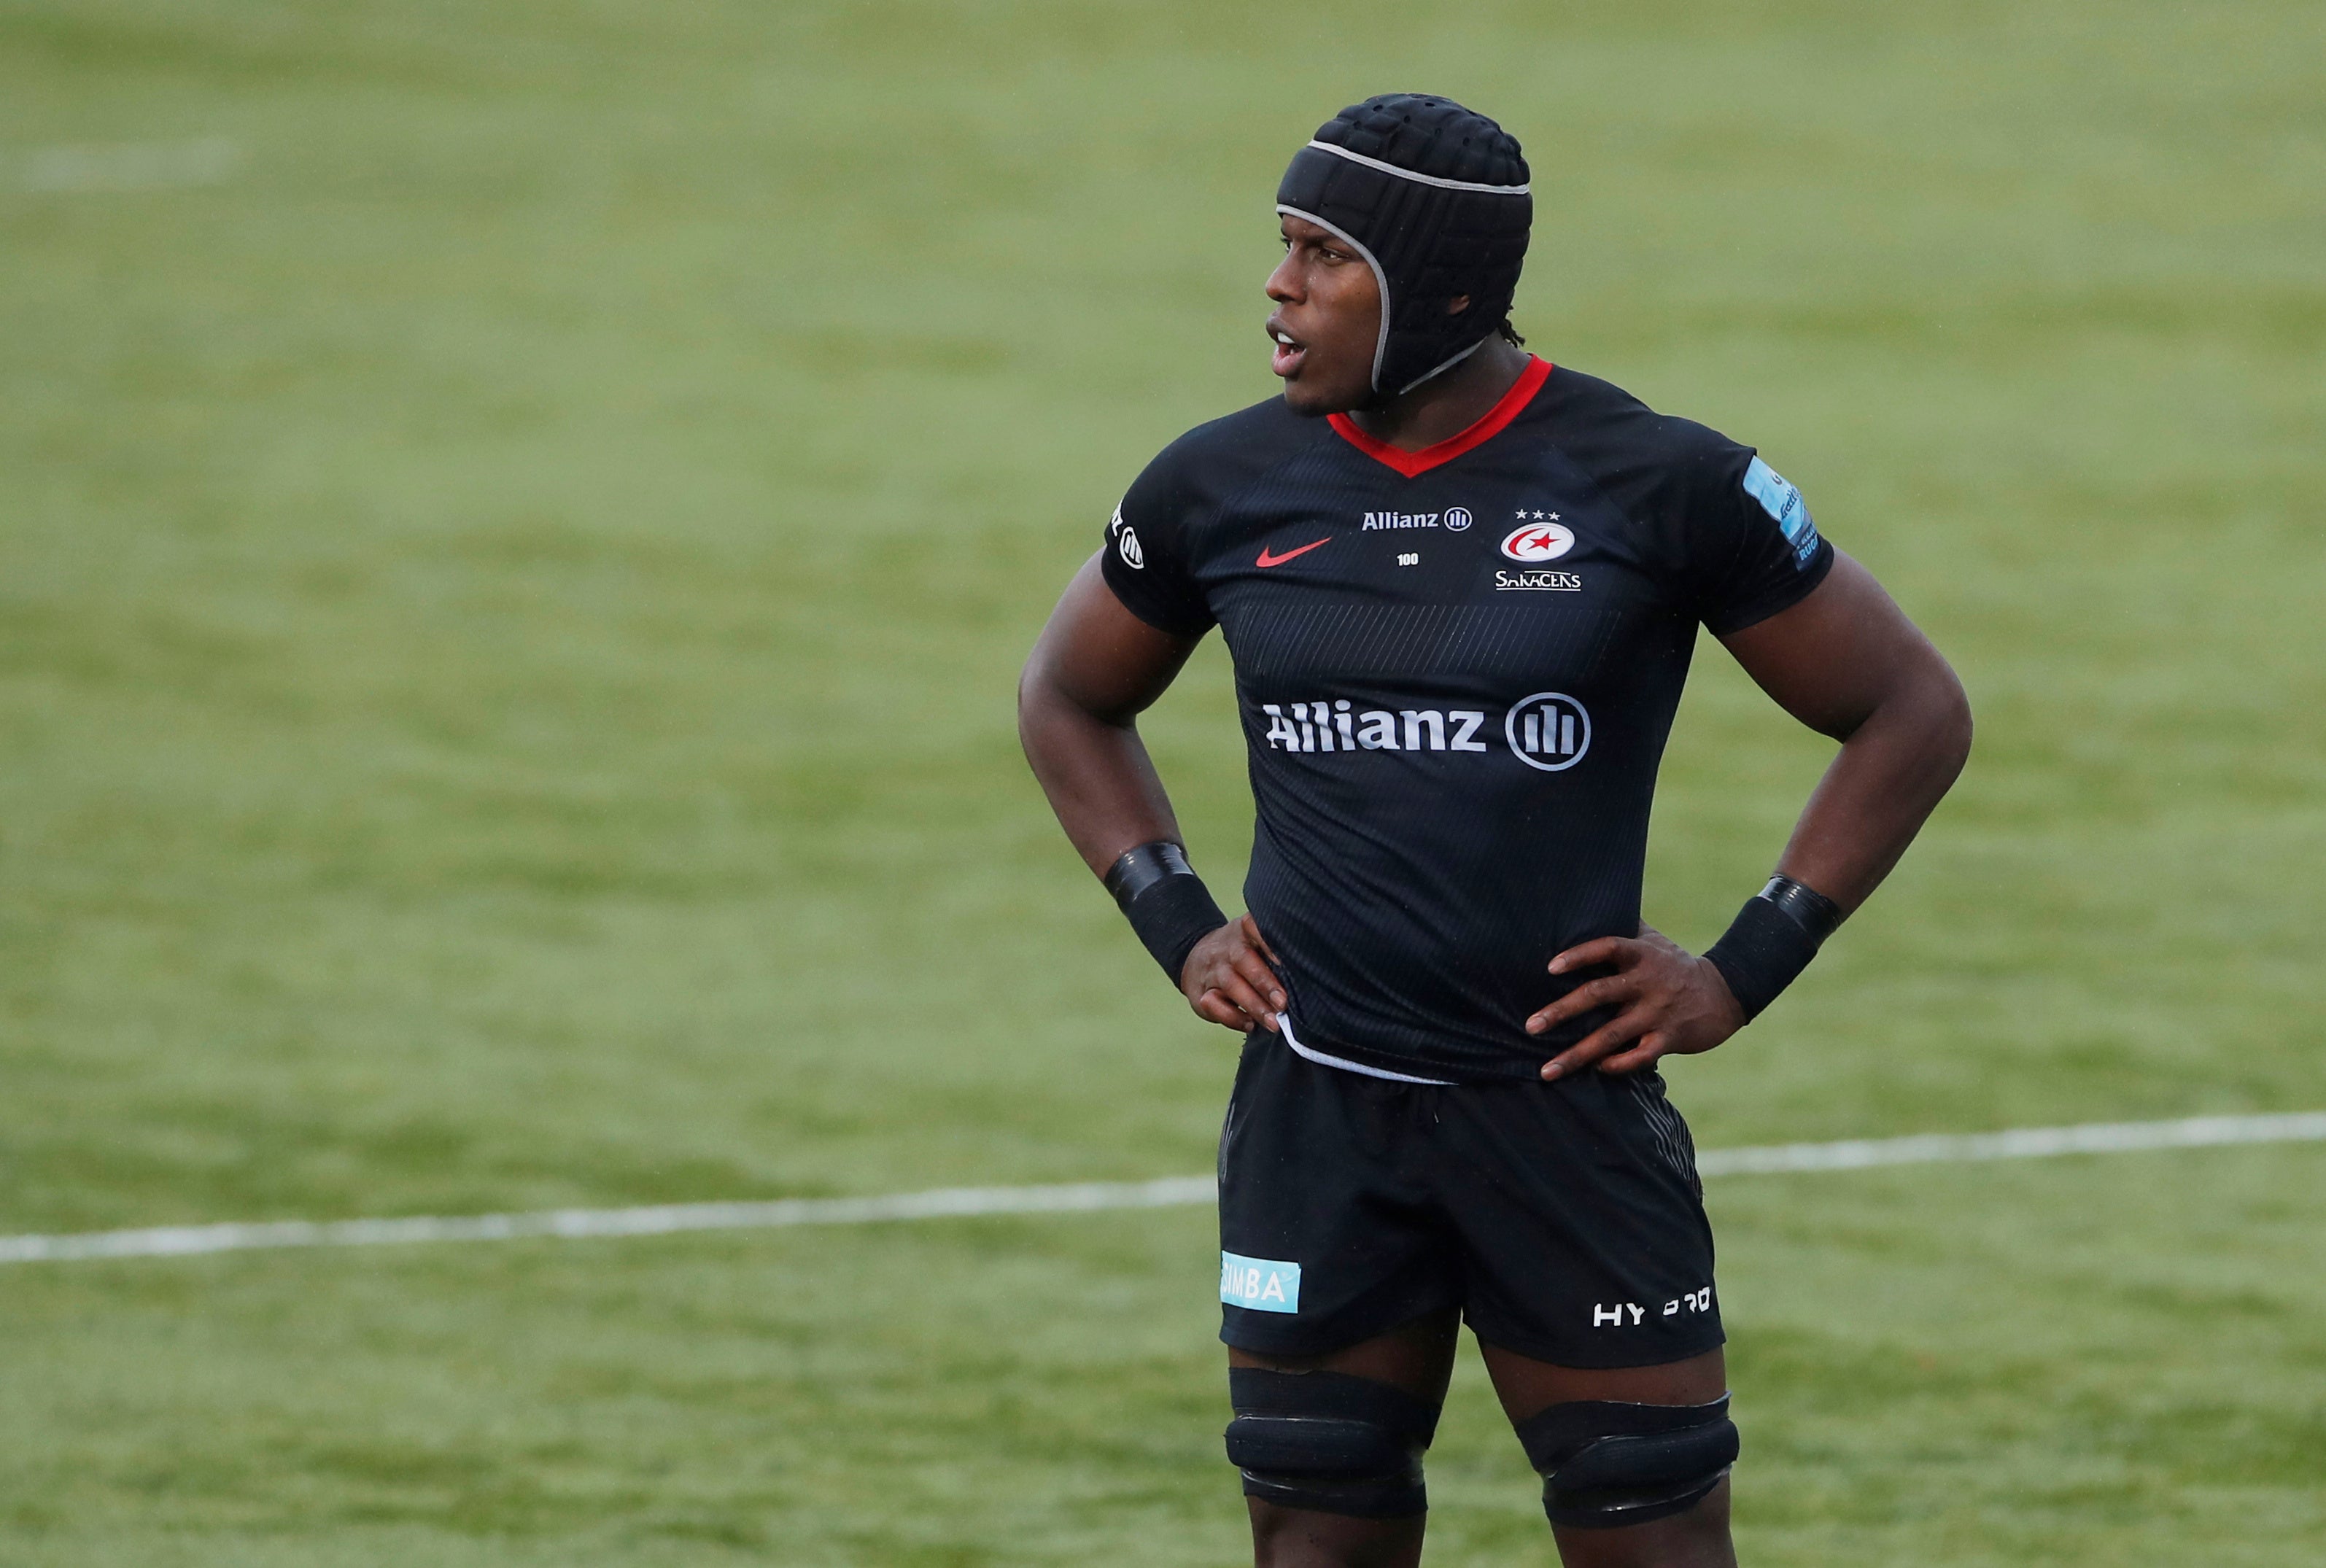 Saracens were relegated from the Premiership after the biggest scandal seen in rugby union